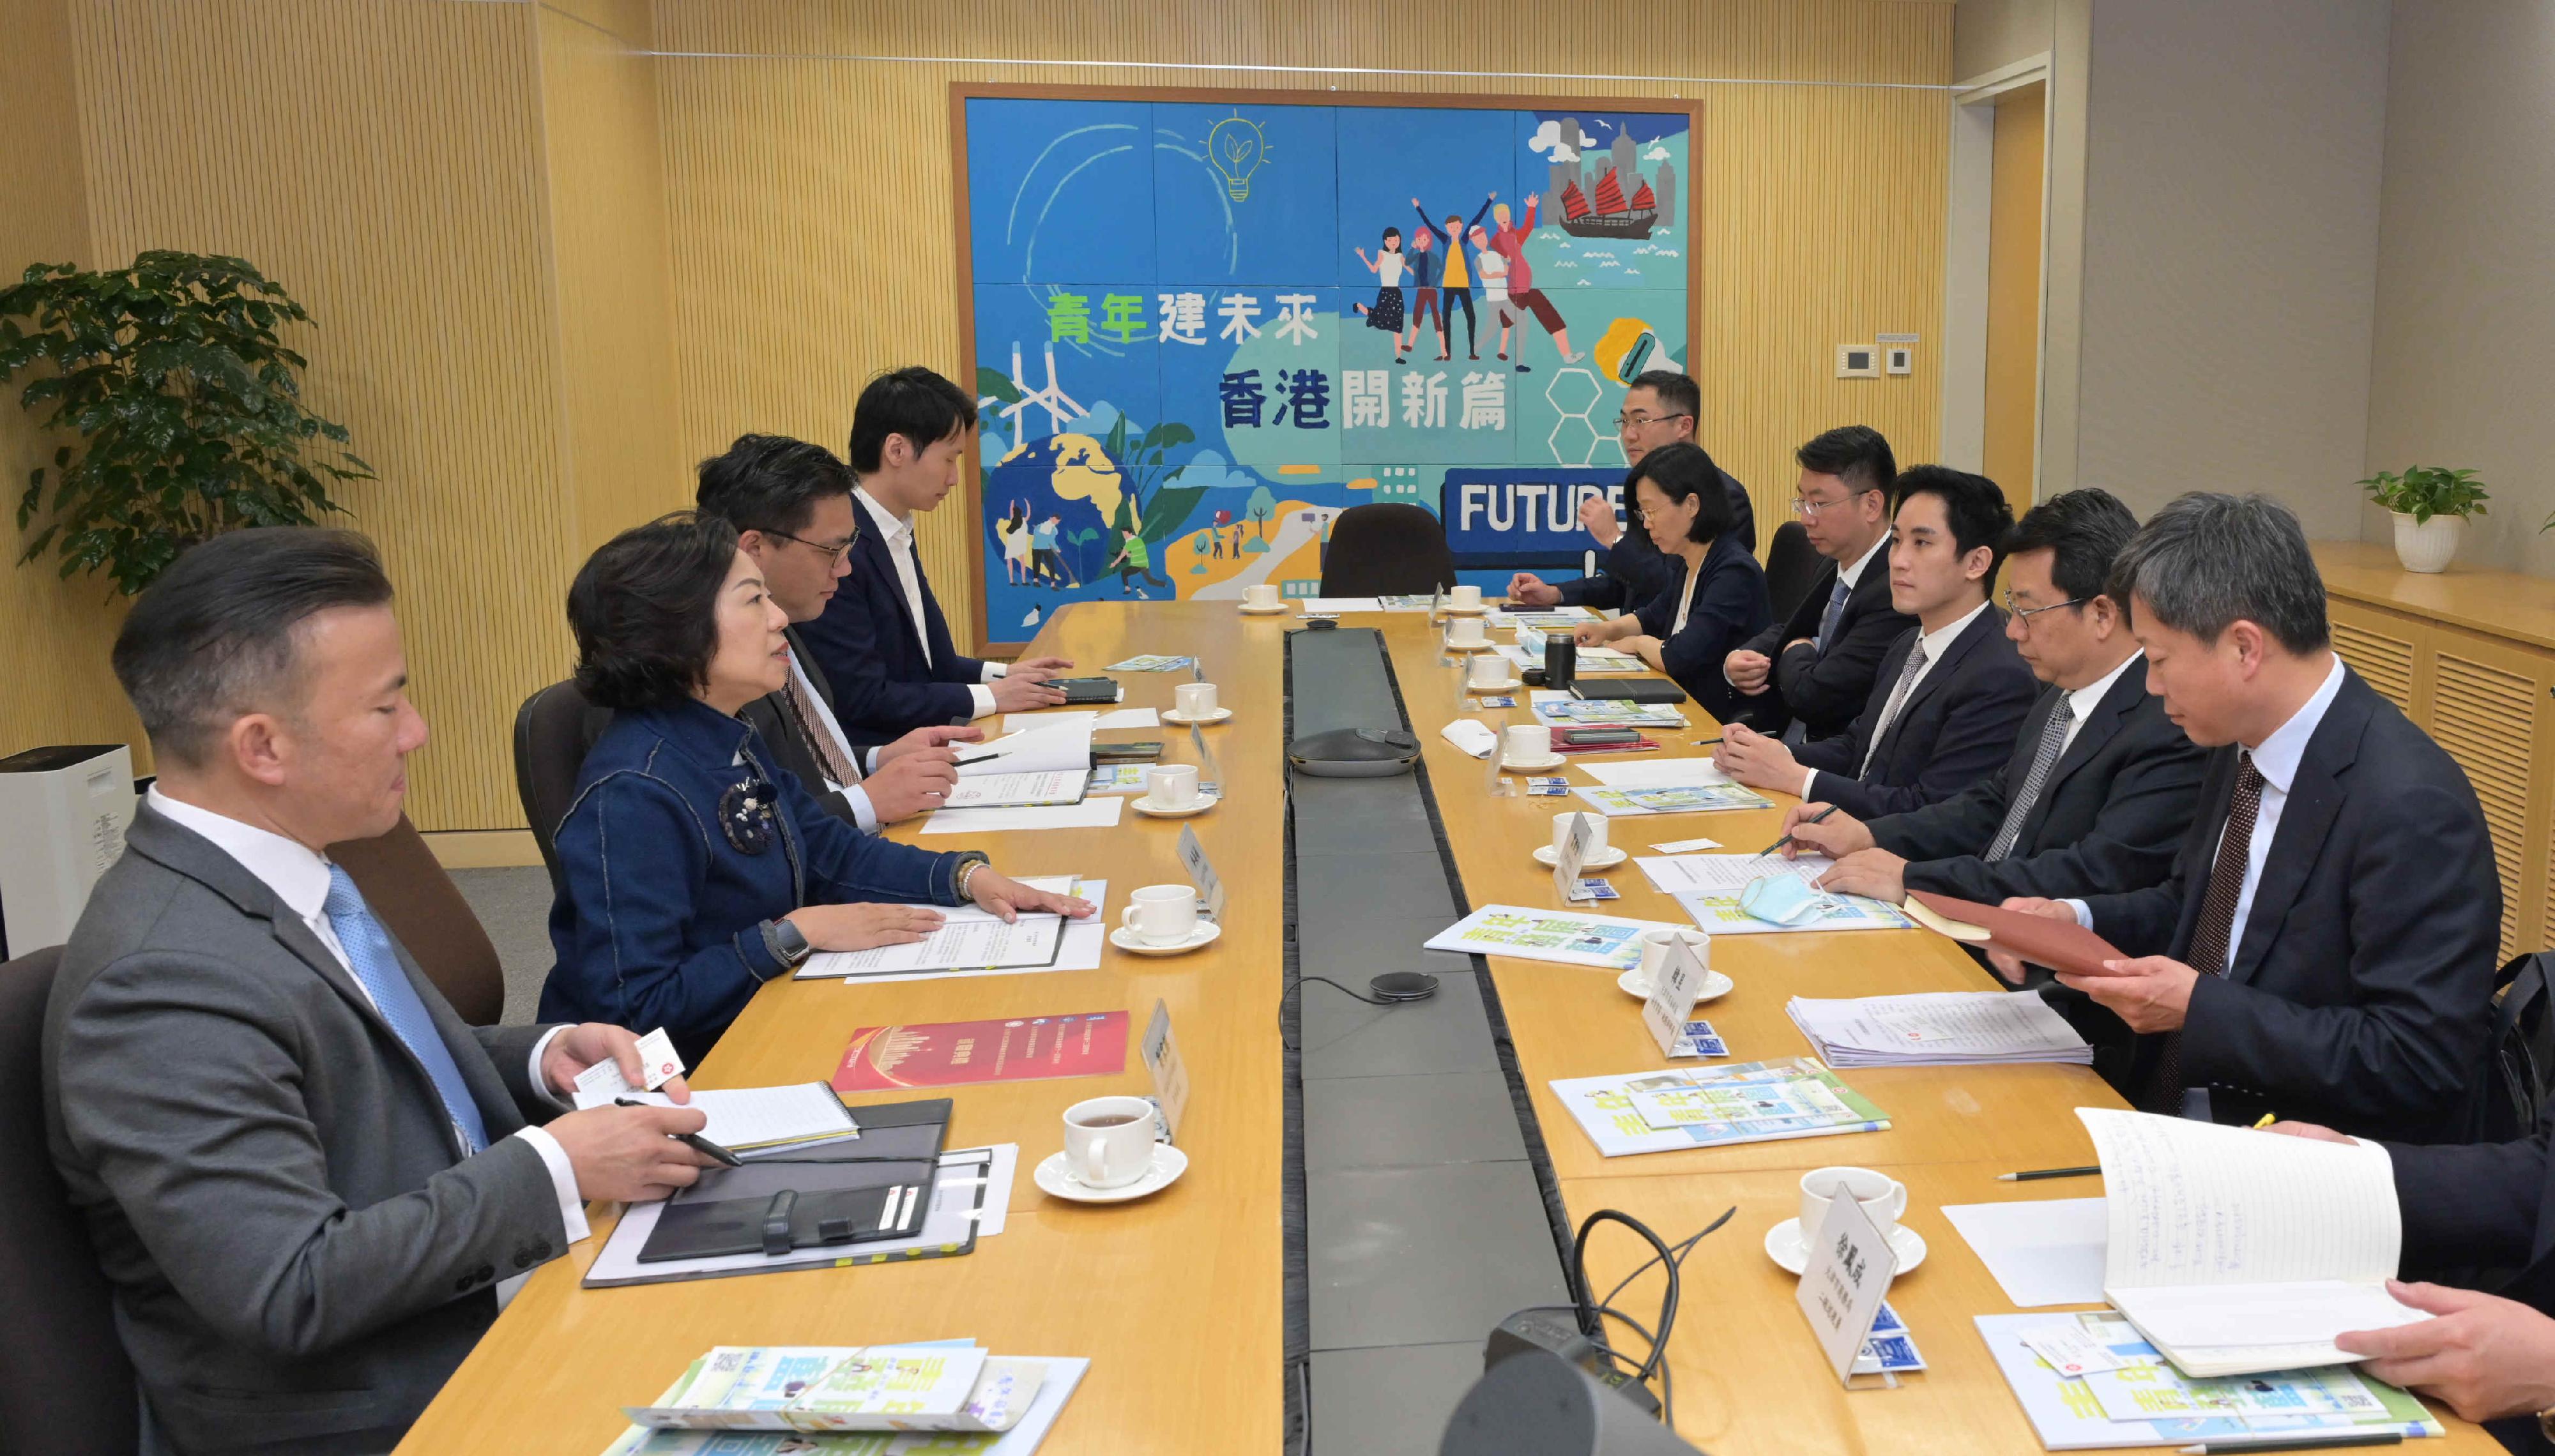 The Secretary for Home and Youth Affairs, Miss Alice Mak, today (May 11) met with a Tianjin delegation led by member of the Standing Committee of the Tianjin Municipal Committee of the Communist Party of China and the Head of the United Front Work Department of the Tianjin Municipal Committee of the Communist Party of China Mr Ji Guoqiang. Photo shows Miss Mak (second left); the Under Secretary for Home and Youth Affairs, Mr Clarence Leung (third left); and the Commissioner for Youth, Mr Wallace Lau (first left), meeting with Mr Ji (second right) and members of the delegation to discuss items of mutual interest.
